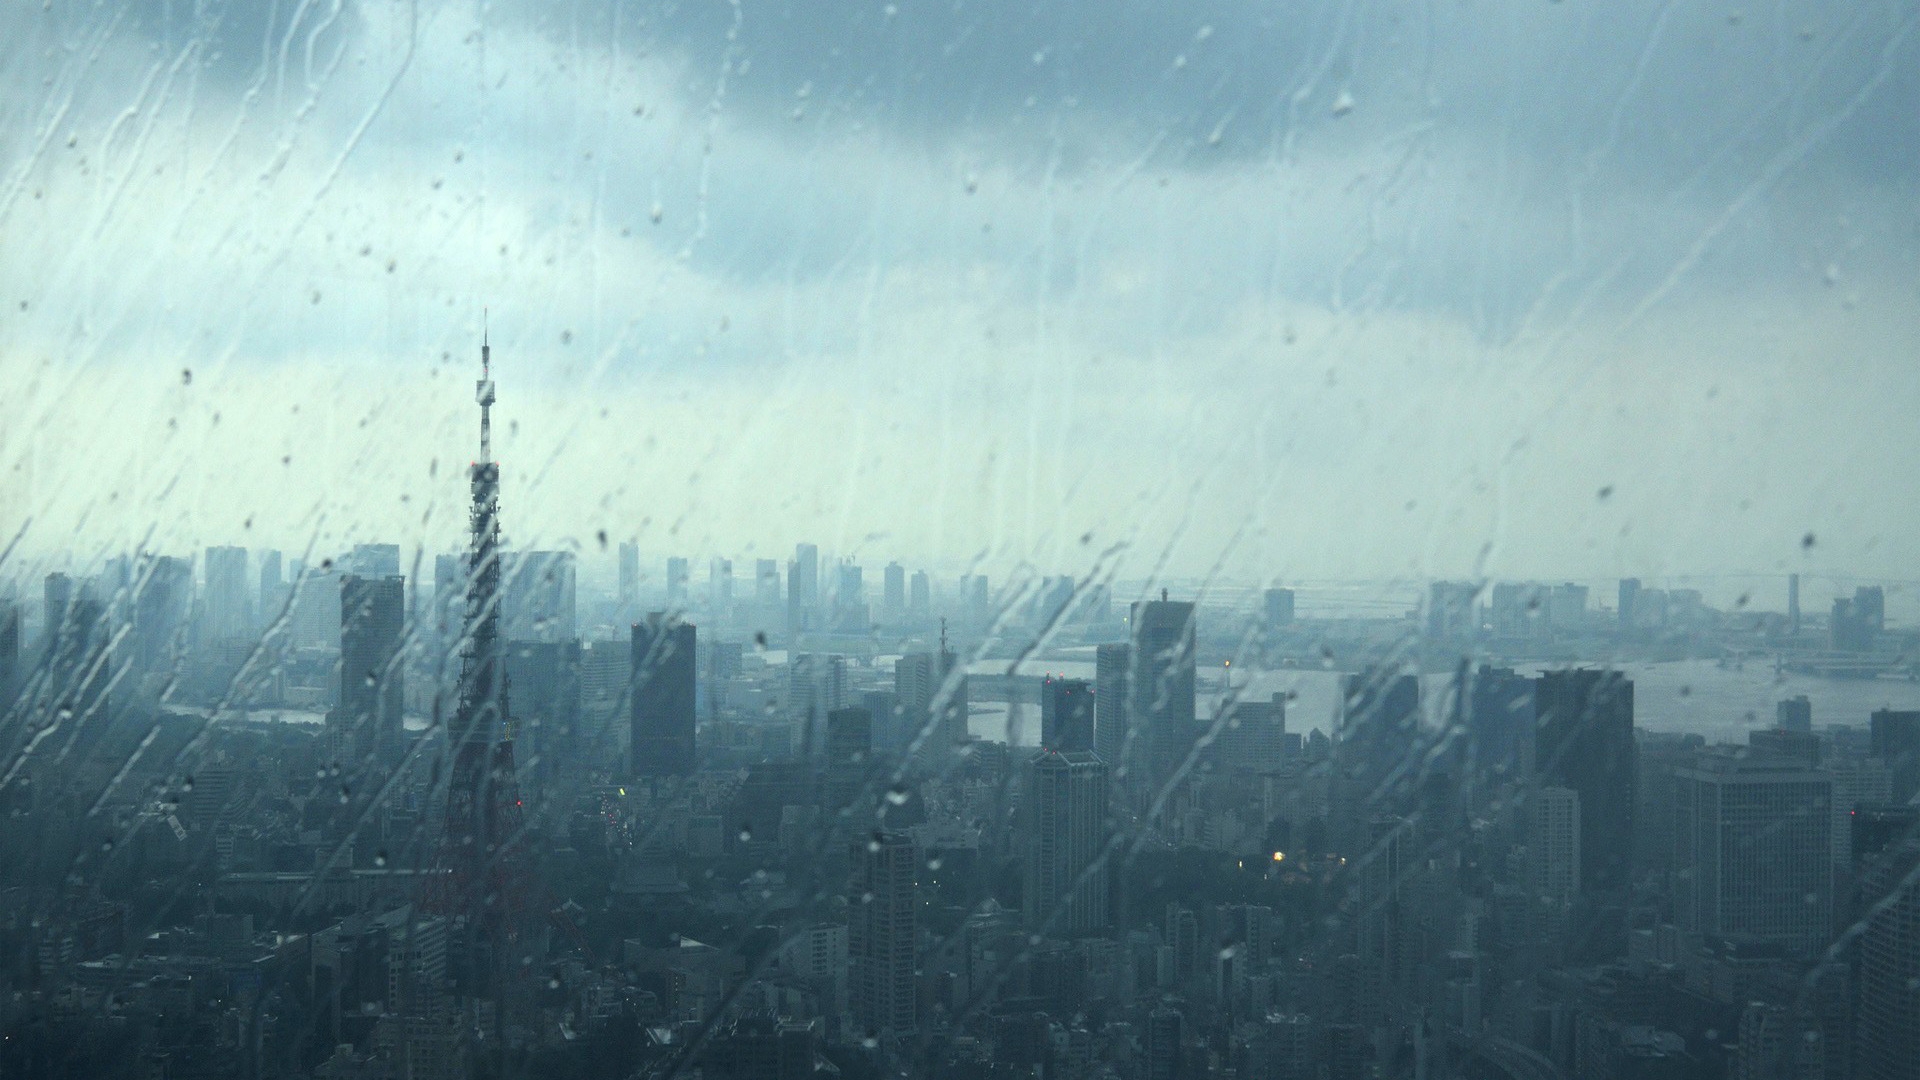 Rainy City View for 1920 x 1080 HDTV 1080p resolution